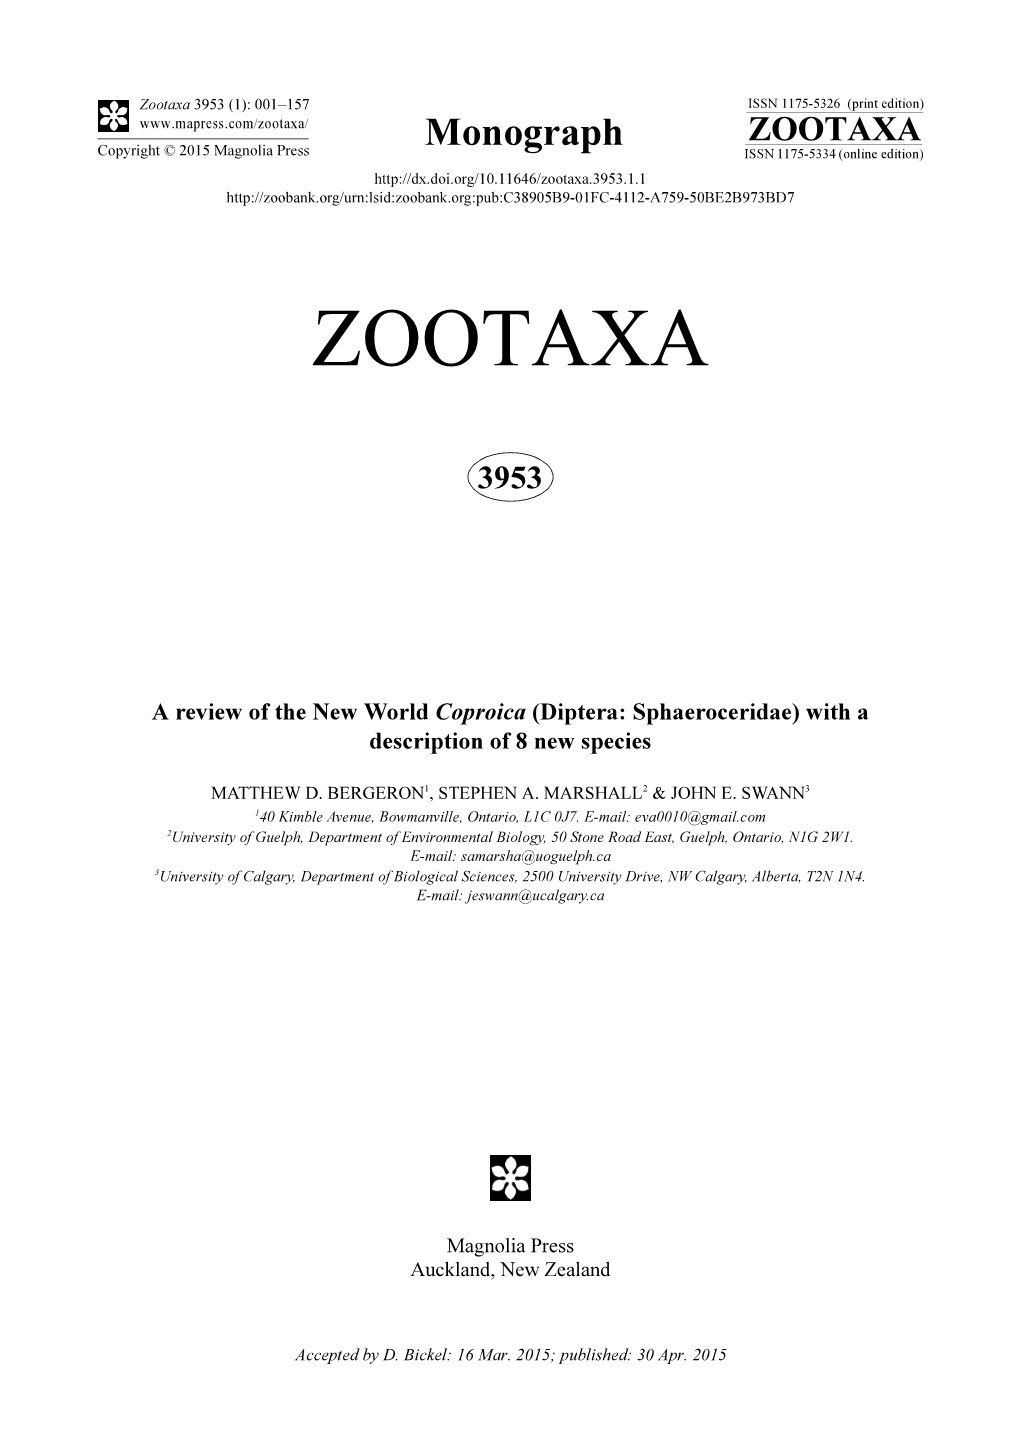 A Review of the New World Coproica (Diptera: Sphaeroceridae) with a Description of 8 New Species